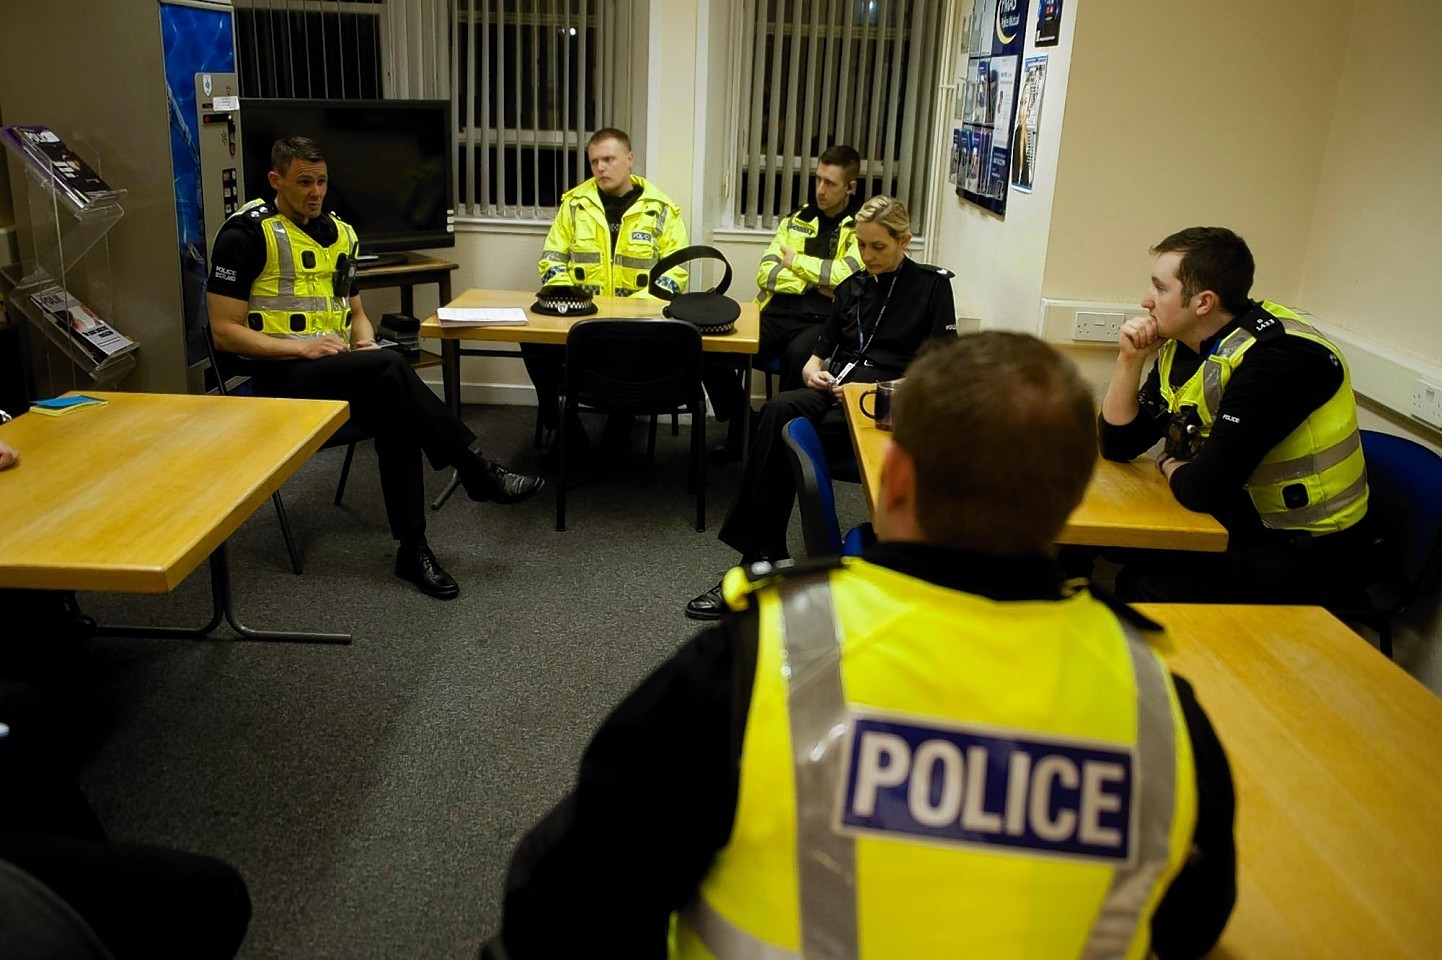 Inspector Rob Sturton holds a meeting before the officers head out onto the streets for the night